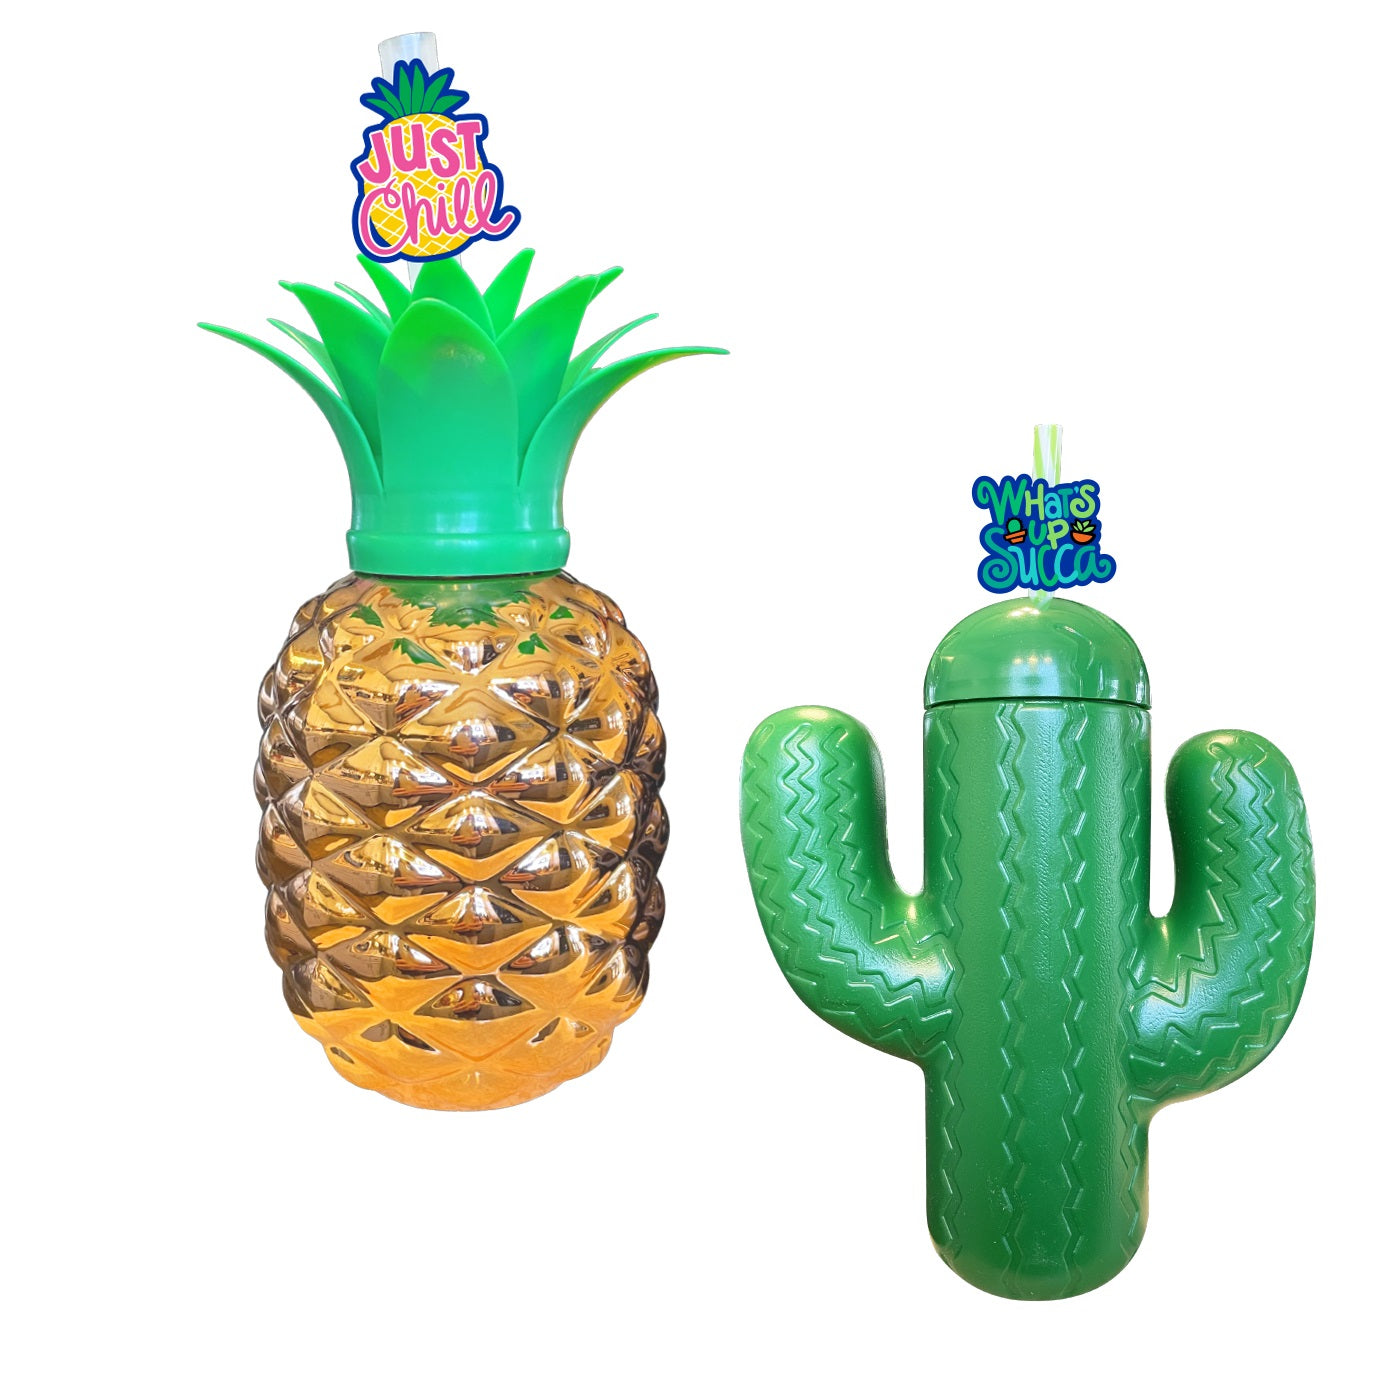 ITEM NUMBER 023857L CACTUS & PINEAPPLE TUMBLER WITH CHARM - STORE SURPLUS NO DISPLAY 8 PIECES PER PACK